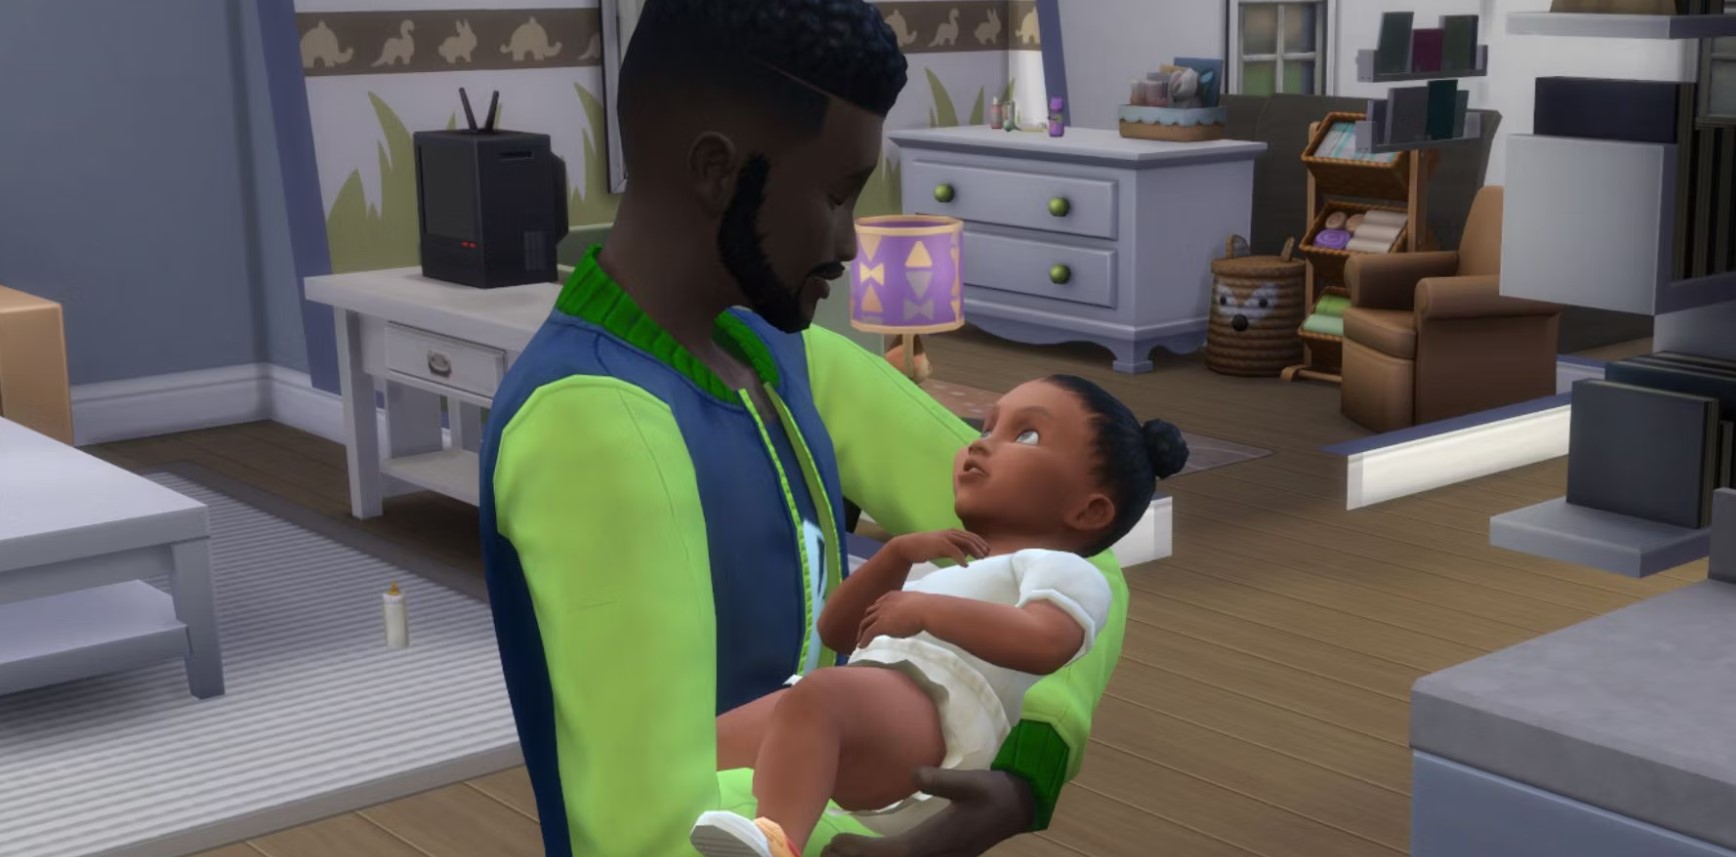 The Sims 4 infants guide 2